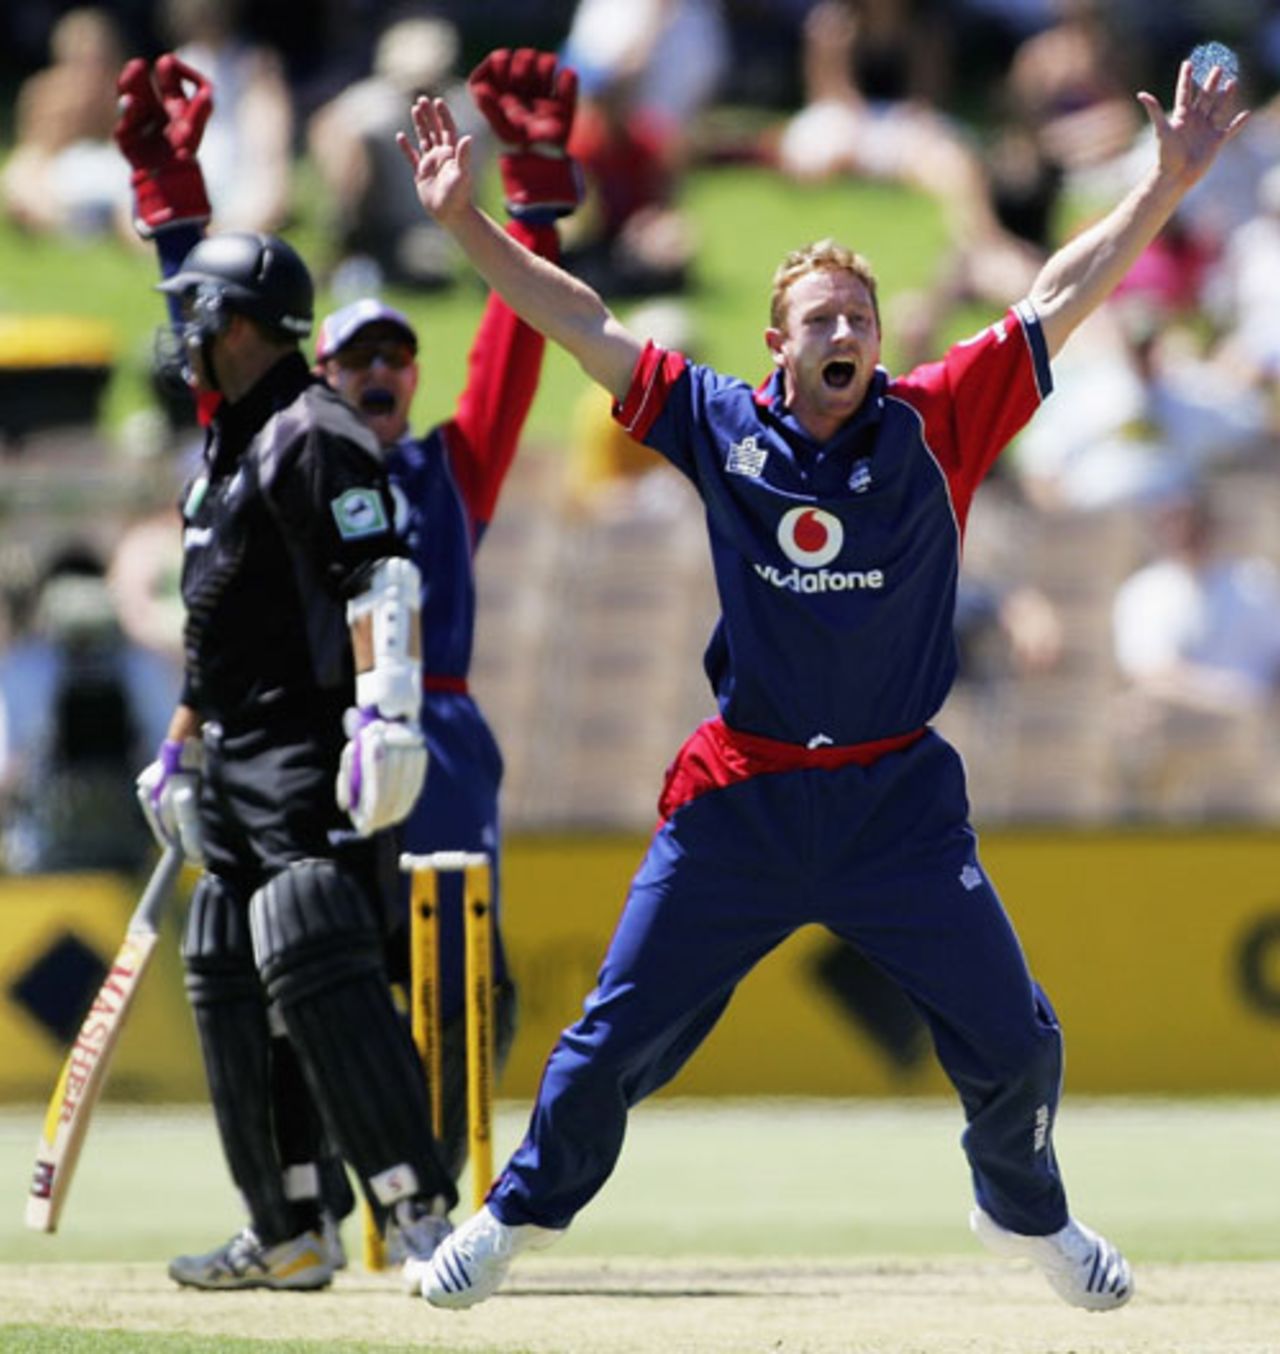 Paul Collingwood enthusiastically - and successfully - appeals against Craig McMillan, England v New Zealand, CB Series, Adelaide, January 23, 2007